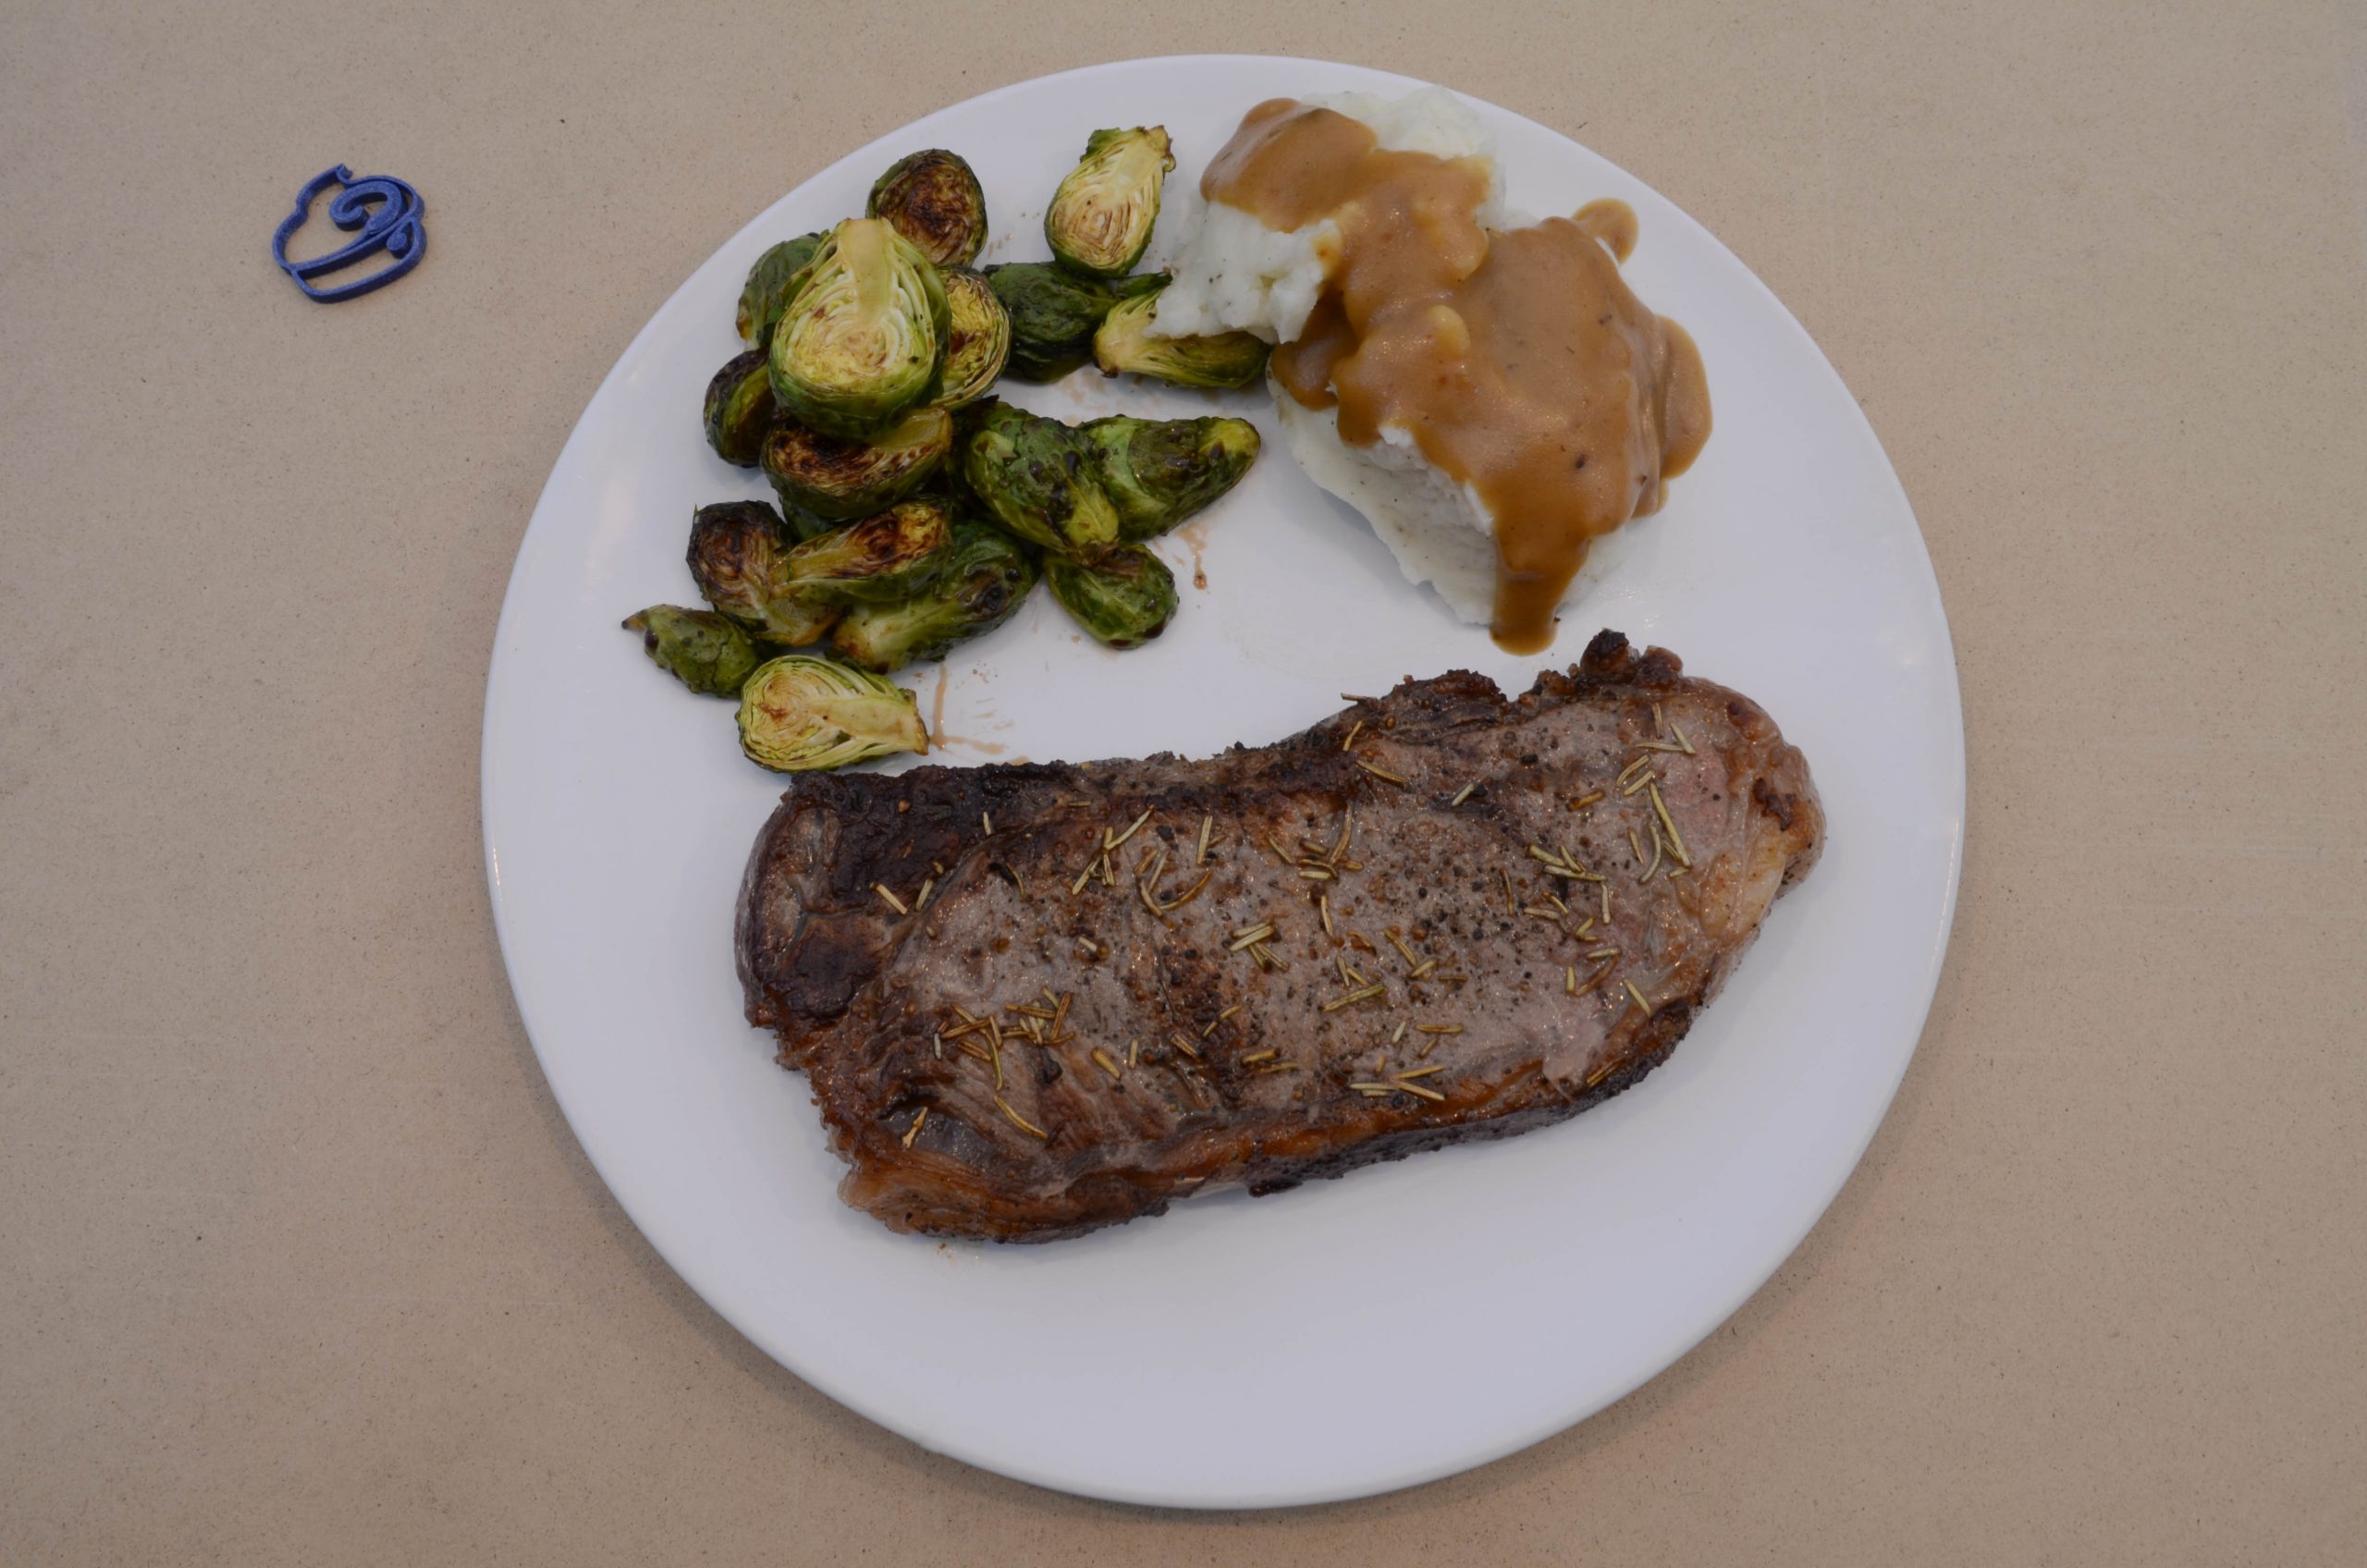 A dish with brussels sprouts as a side to steak and mashed potatoes